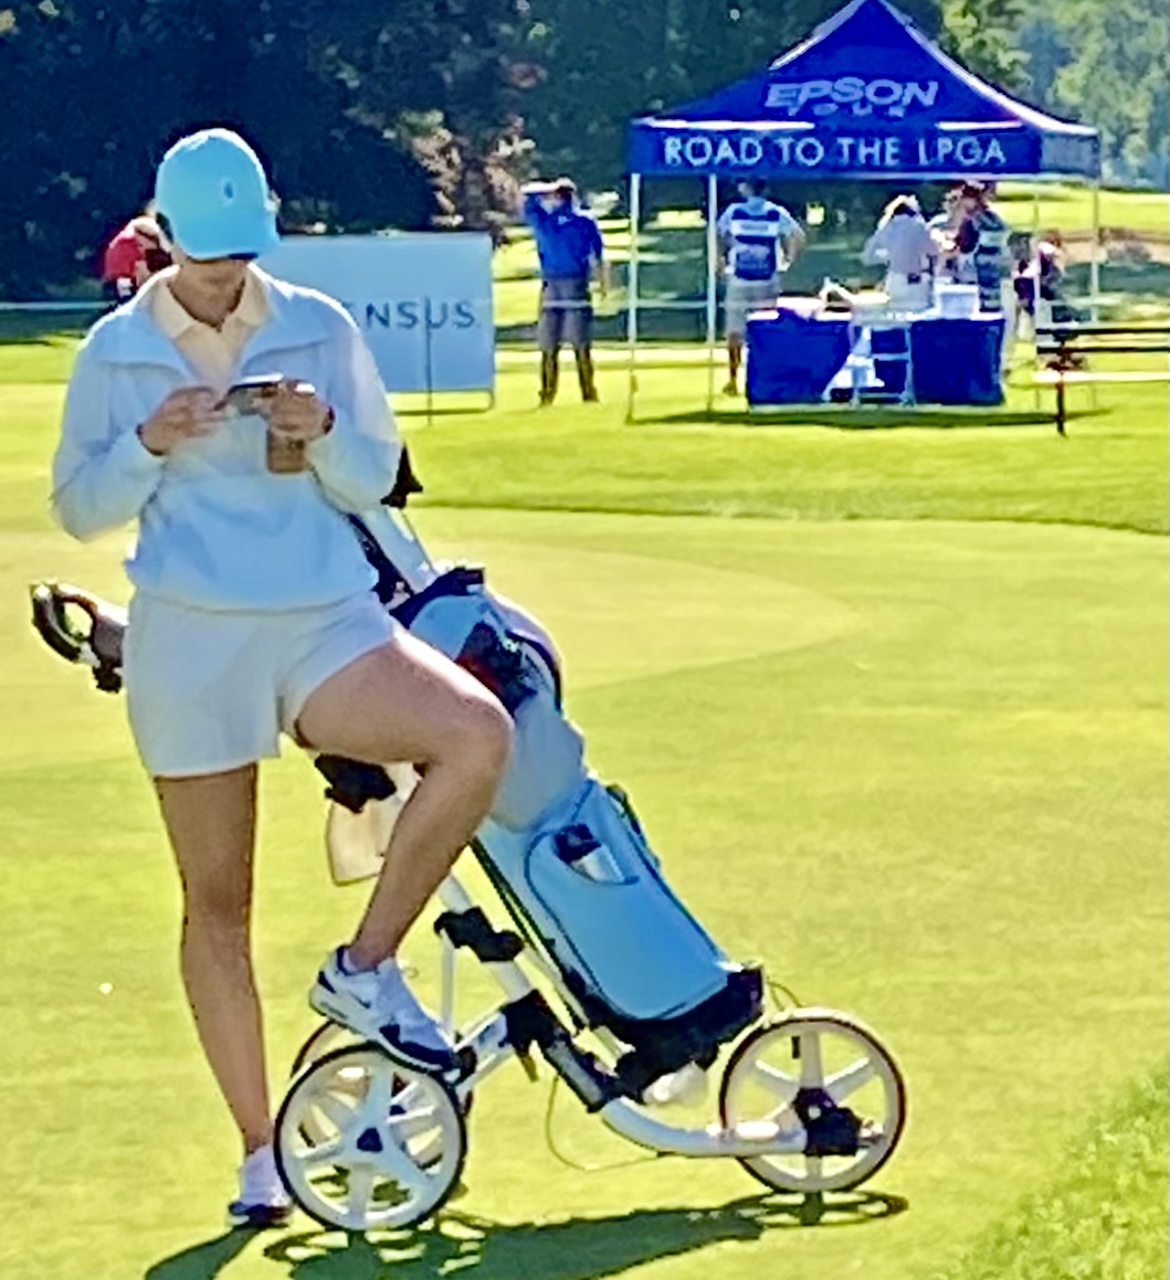 Pull cart trolleys, not LearJets, are the road to the LPGA through the FireKeepers Golf Classic Photo by: Harrison Shiels 